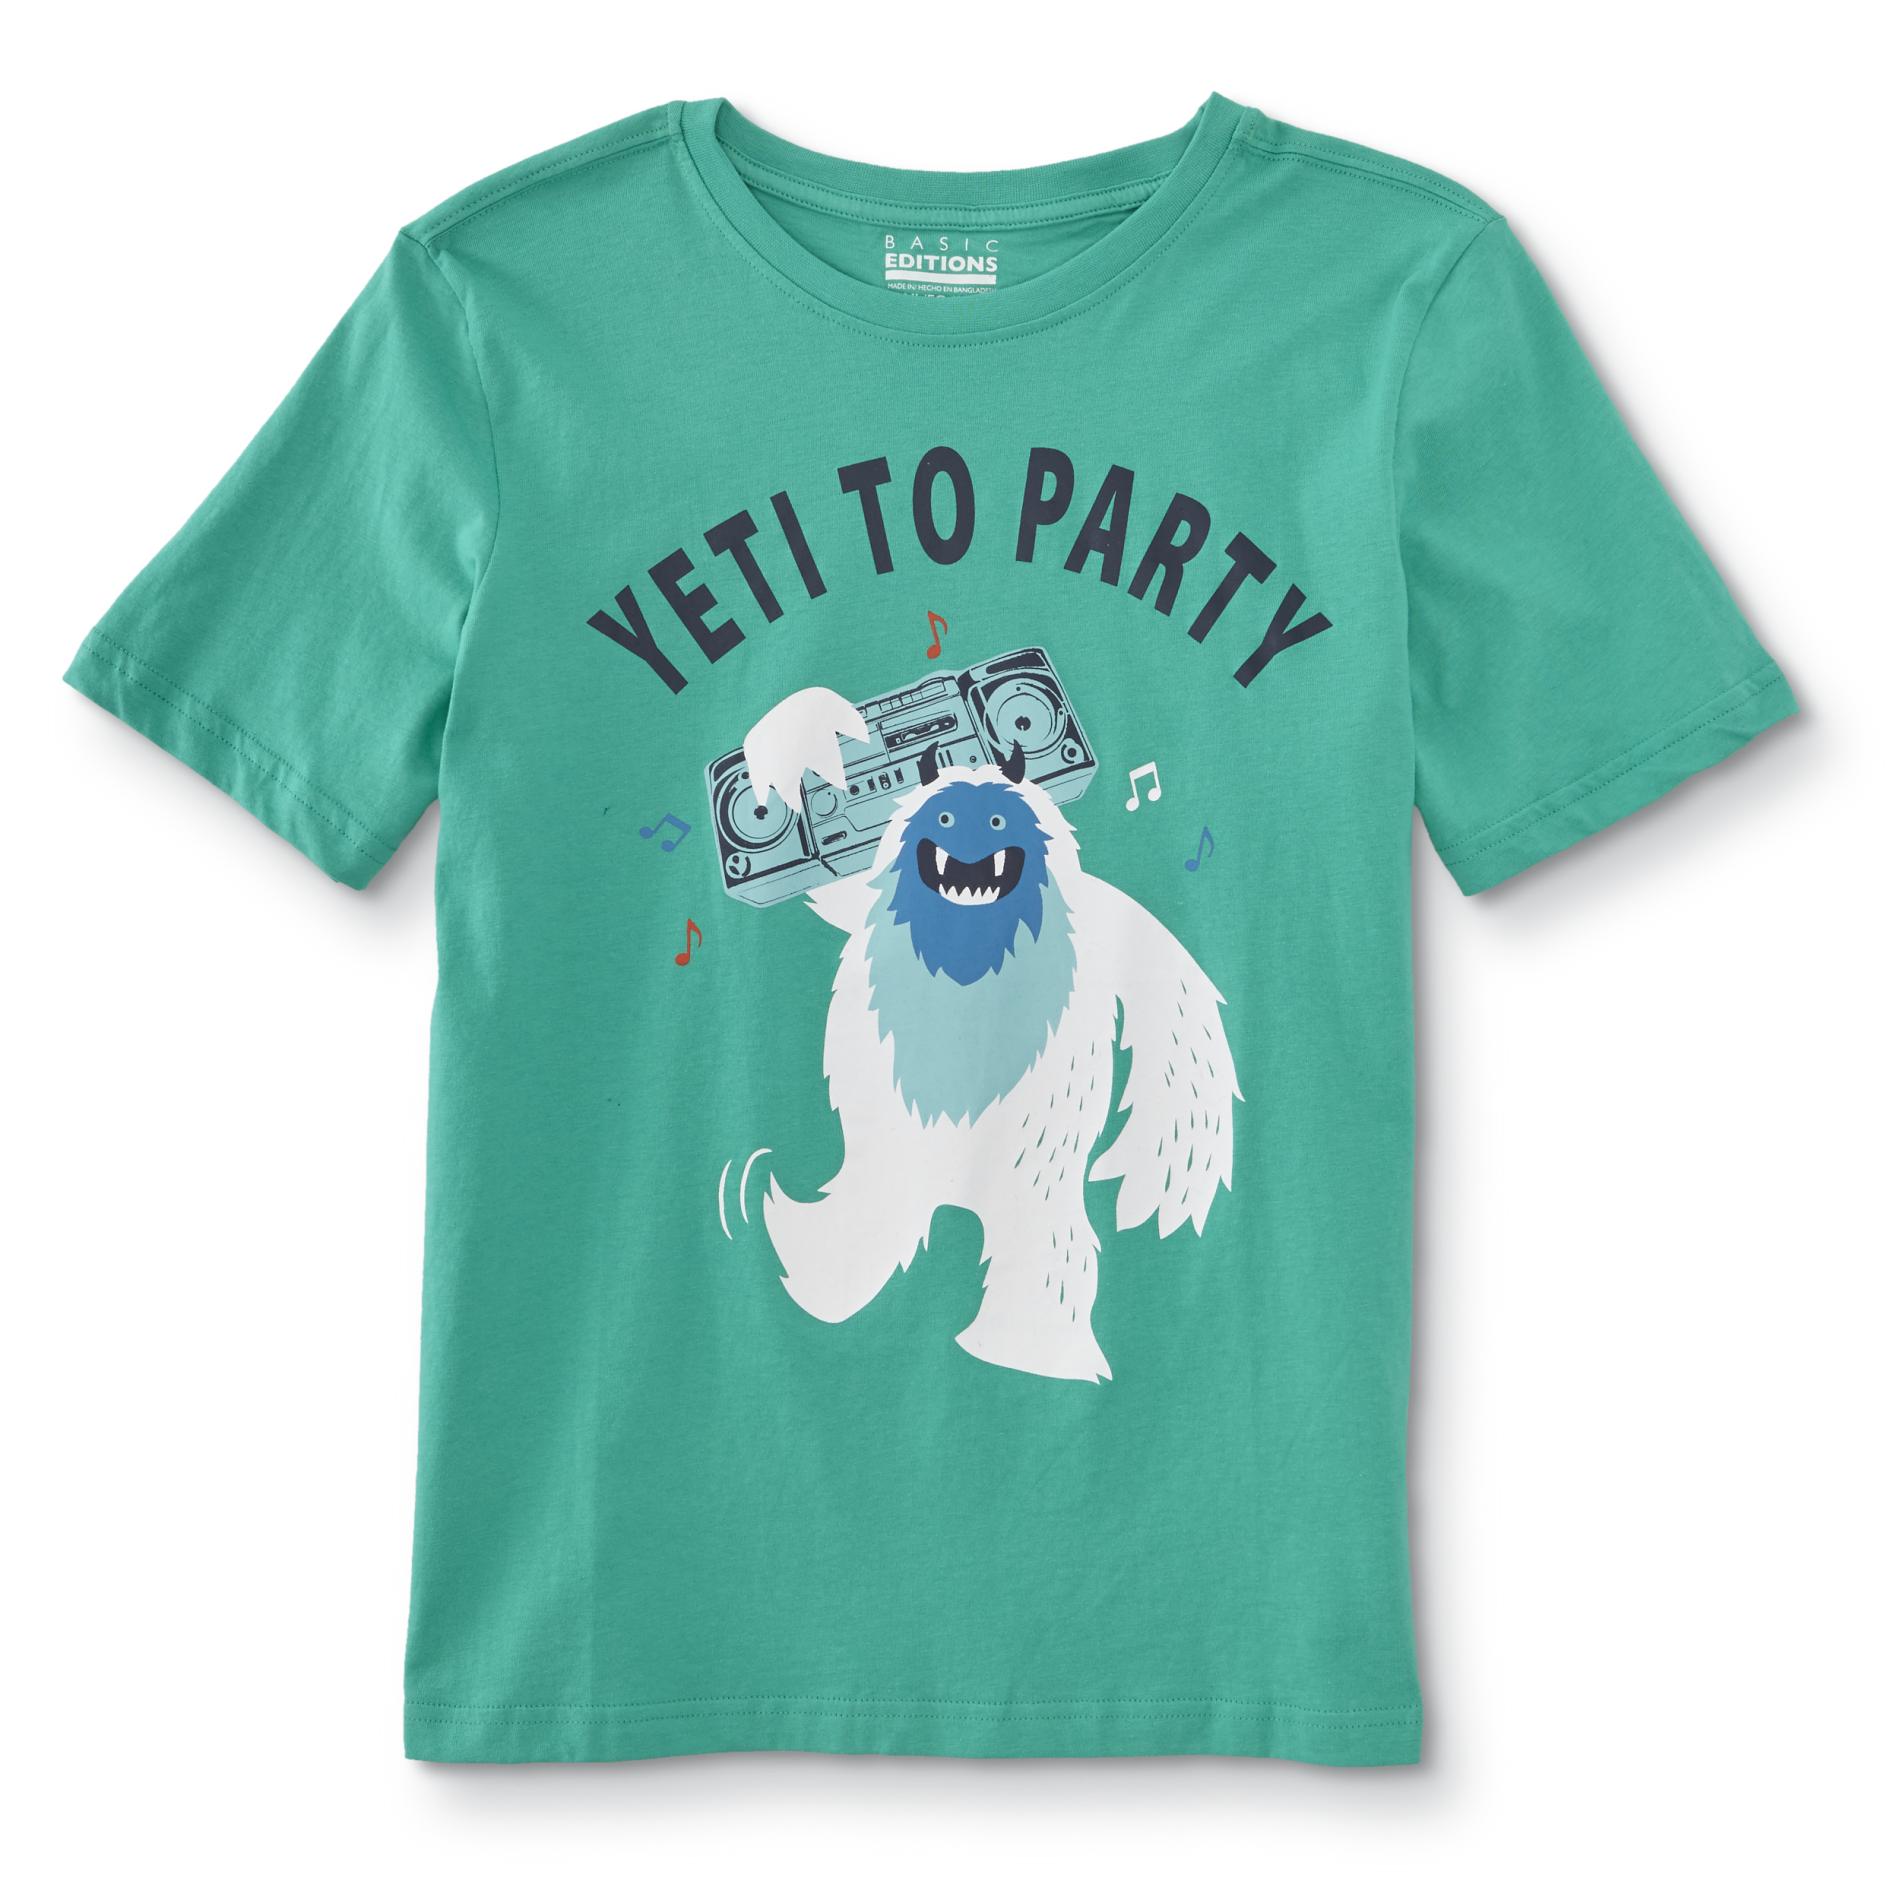 Basic Editions Boys' Graphic T-Shirt - Yeti to Party